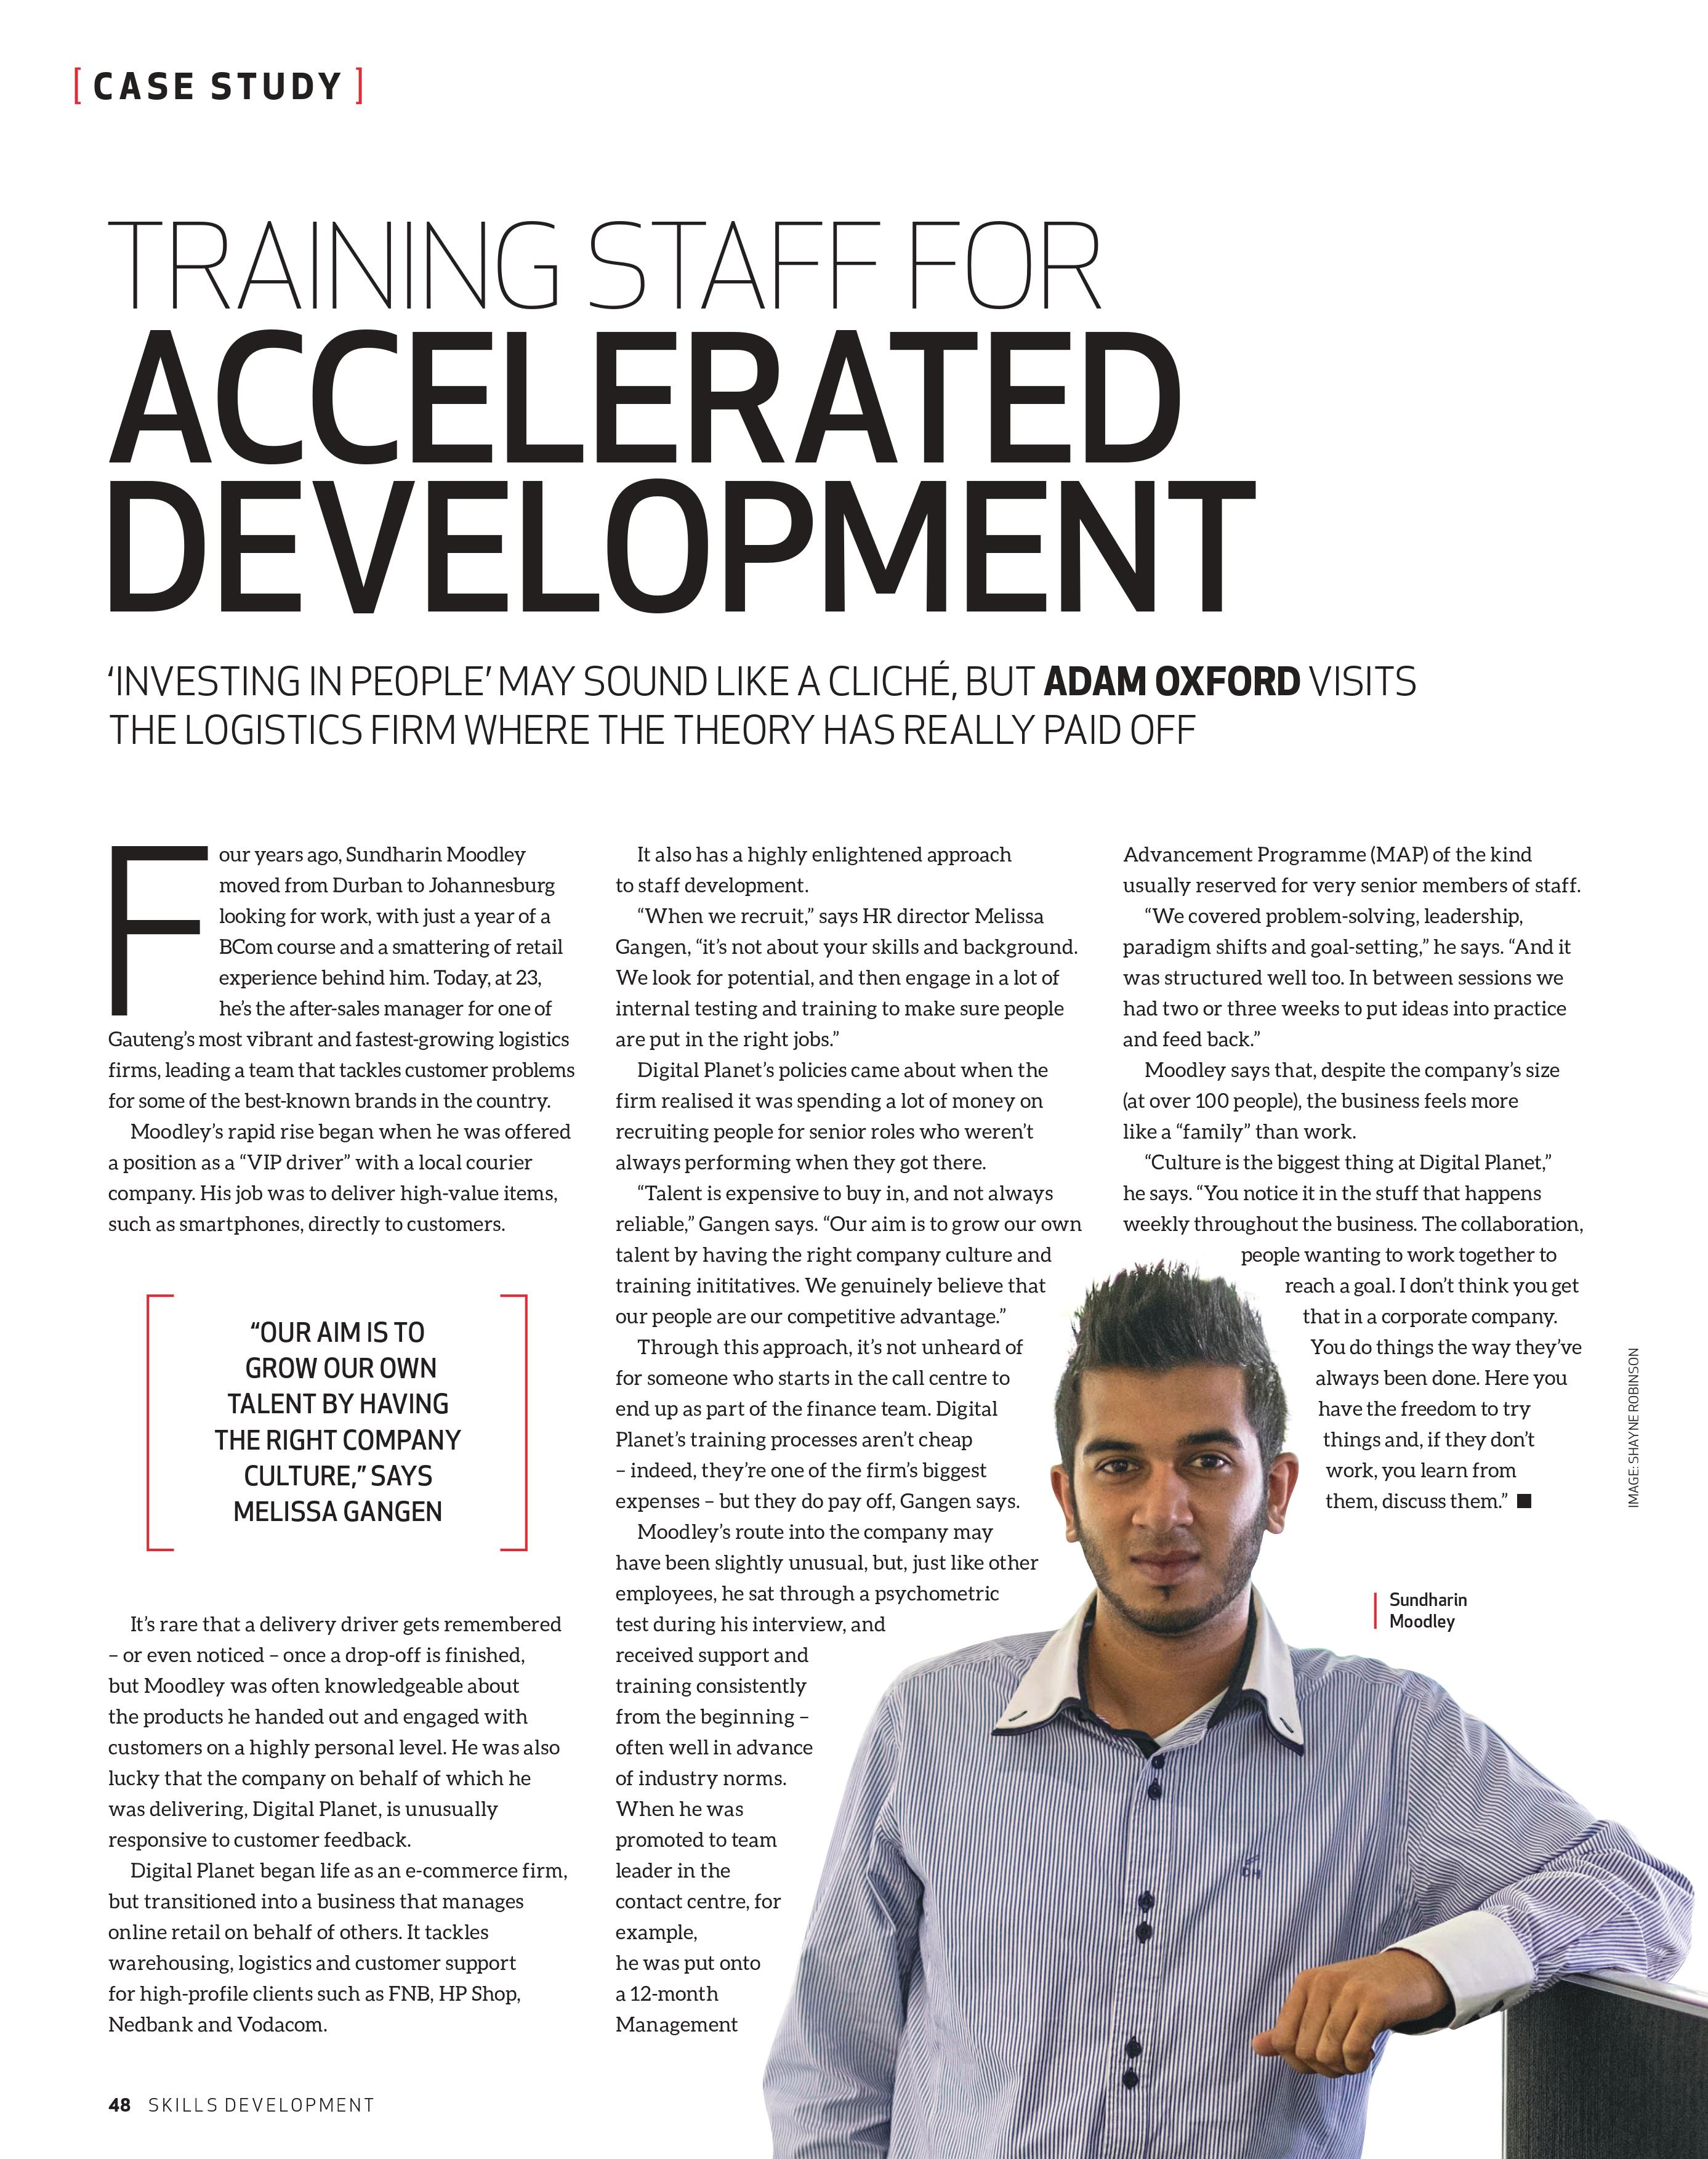 Training Staff for Accelerated Development – Published in the Sunday Times HR & Skills Section